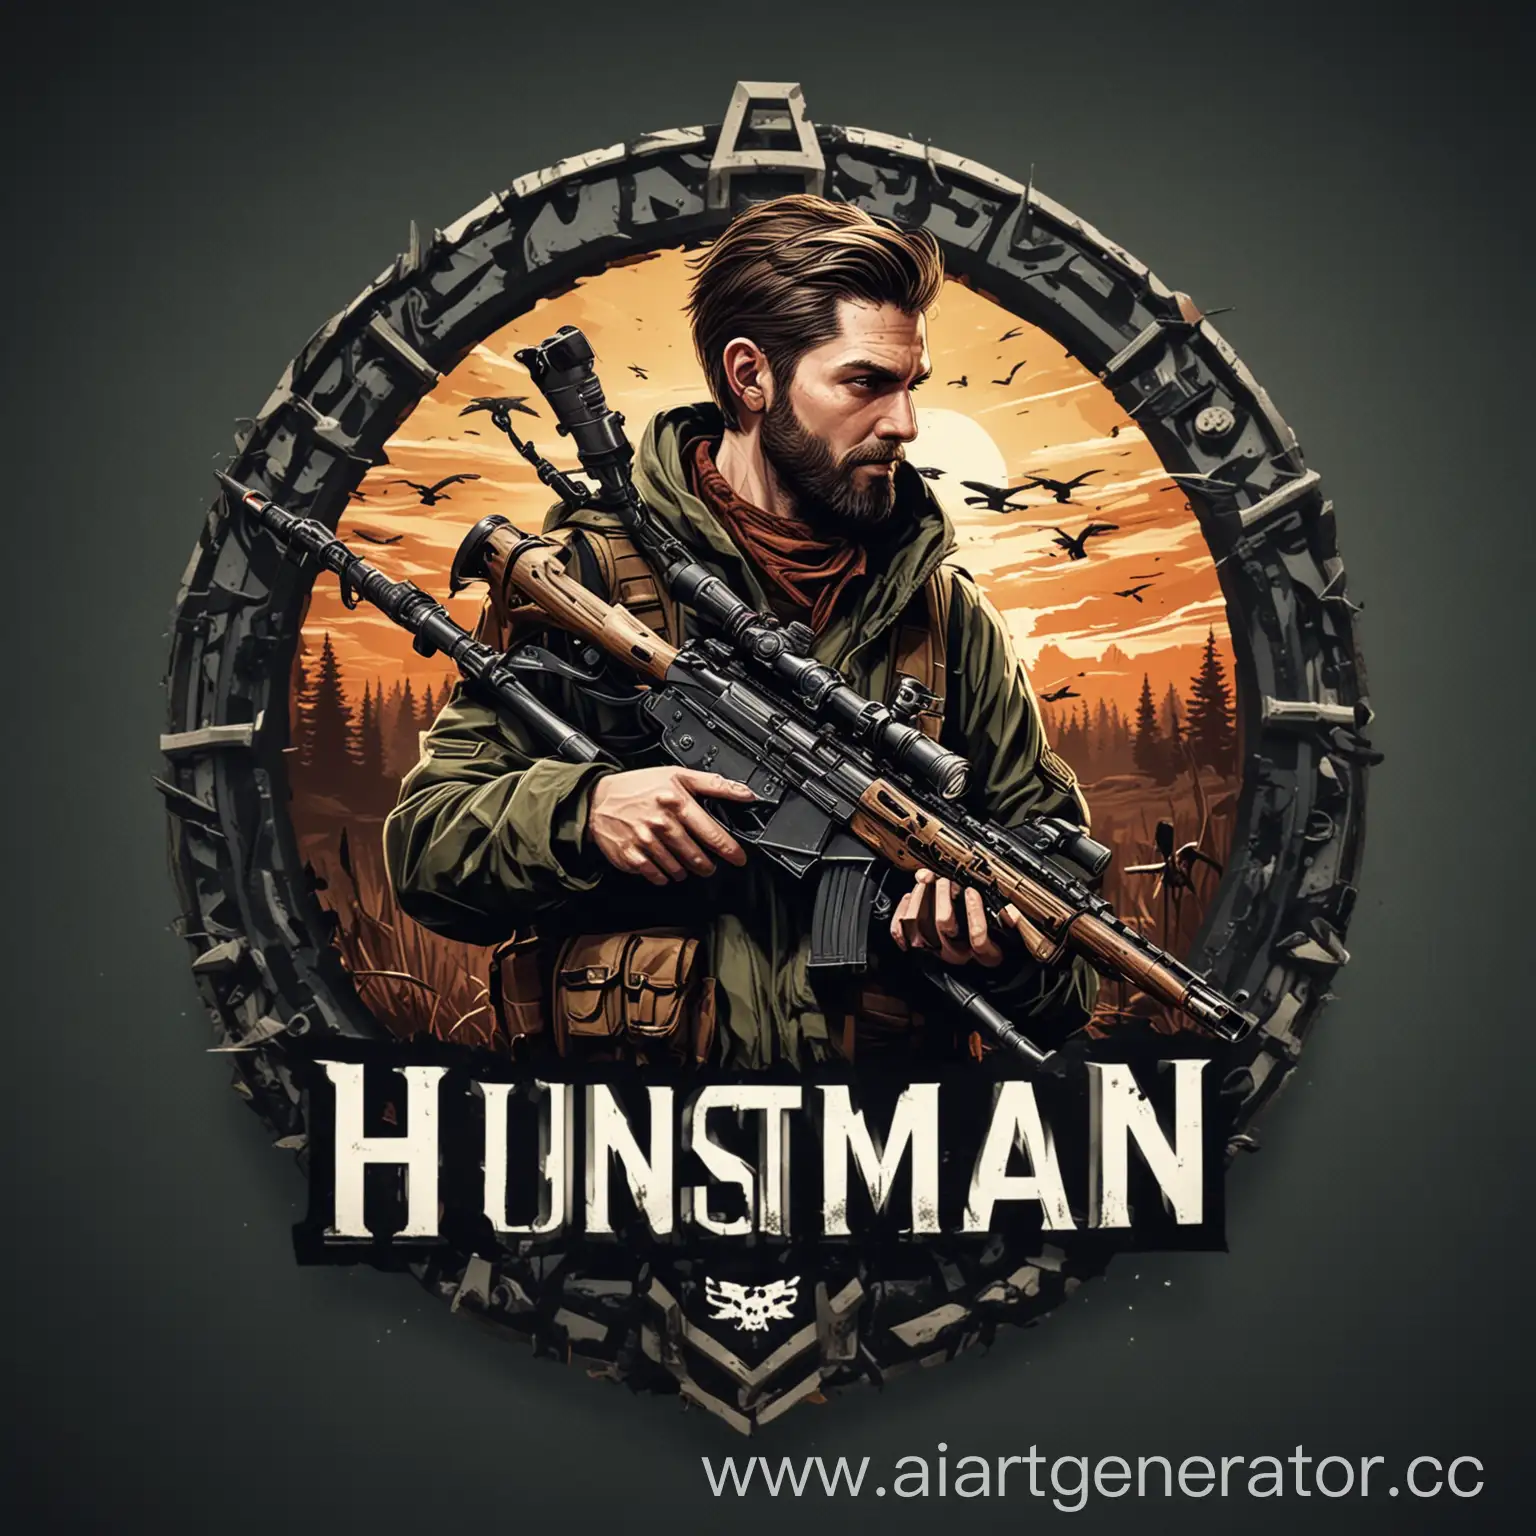 Let inside the modern logo for a gaming club called Huntsman be an image of a person holding a sniper in the background